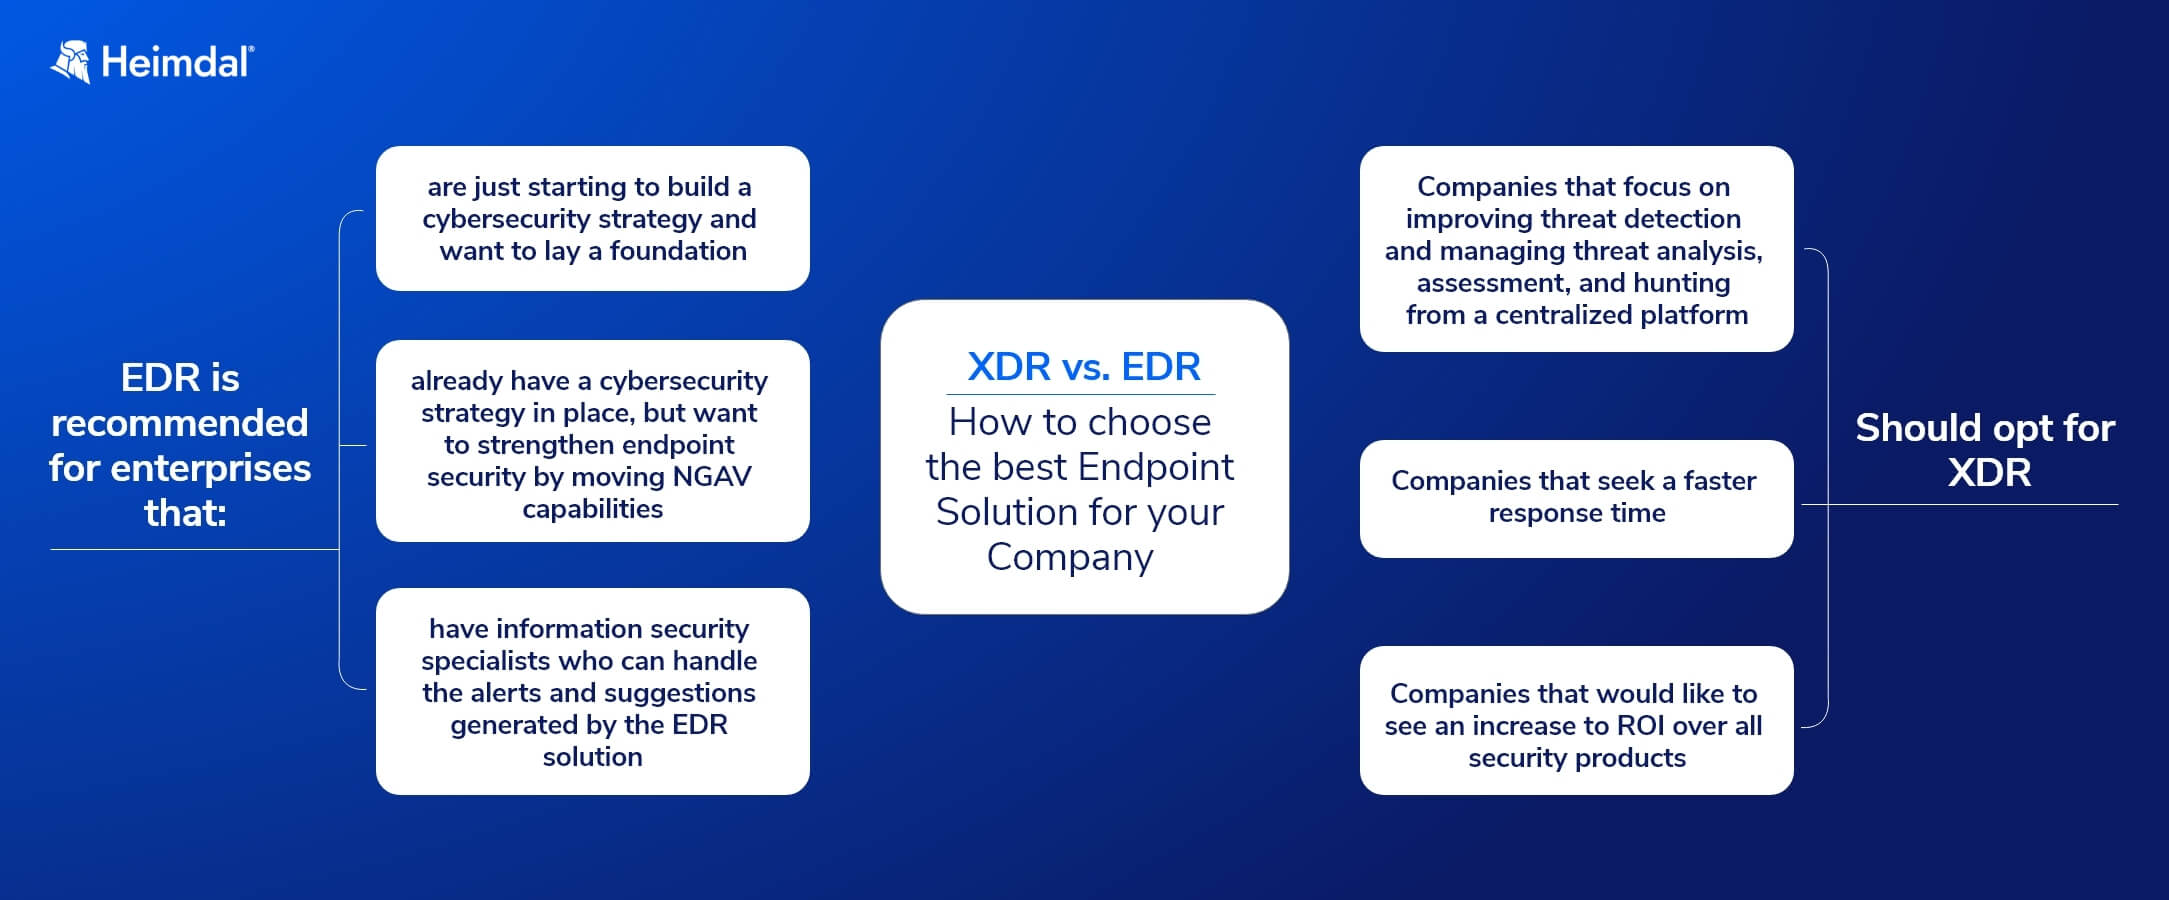 xdr vs edr - on how to choose